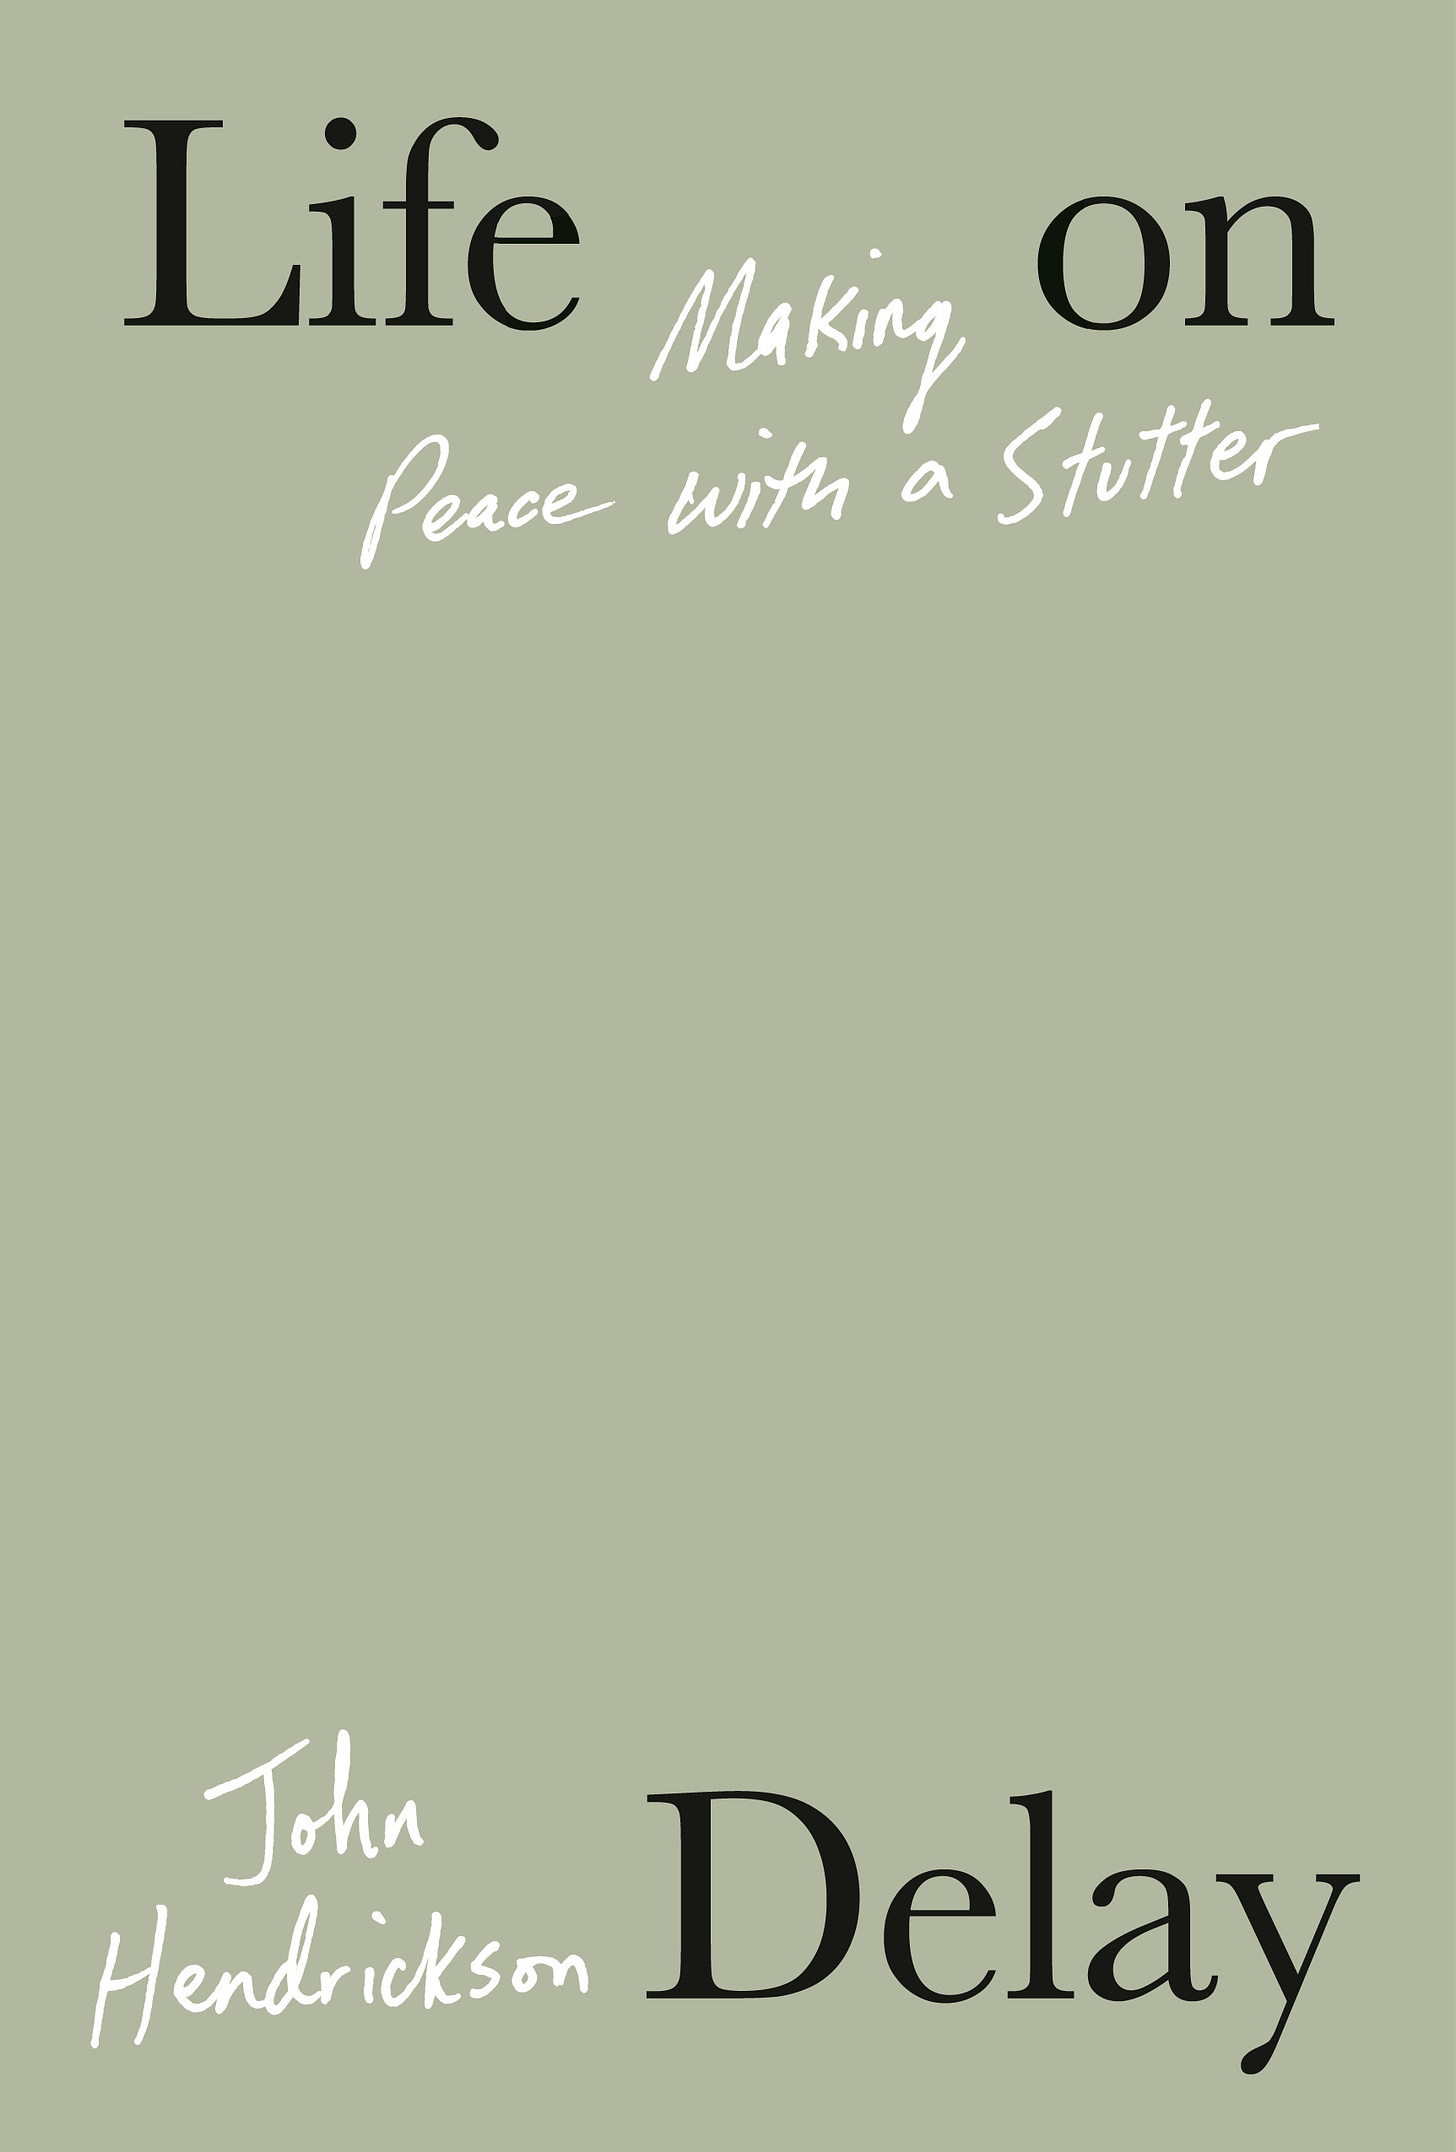 The cover of John Hendrickson’s LIFE ON DELAY is a light green with sparse text and no imagery. The author’s name and the subtitle “Making Peace with a Stutter” are both in a handwriting font, whereas the book title is in a serif font and its words, individually, are dispersed among the cover. The text reads: Life on Delay (in black type), Making Peace with a Stutter (in white type), John Hendrickson (in white type).